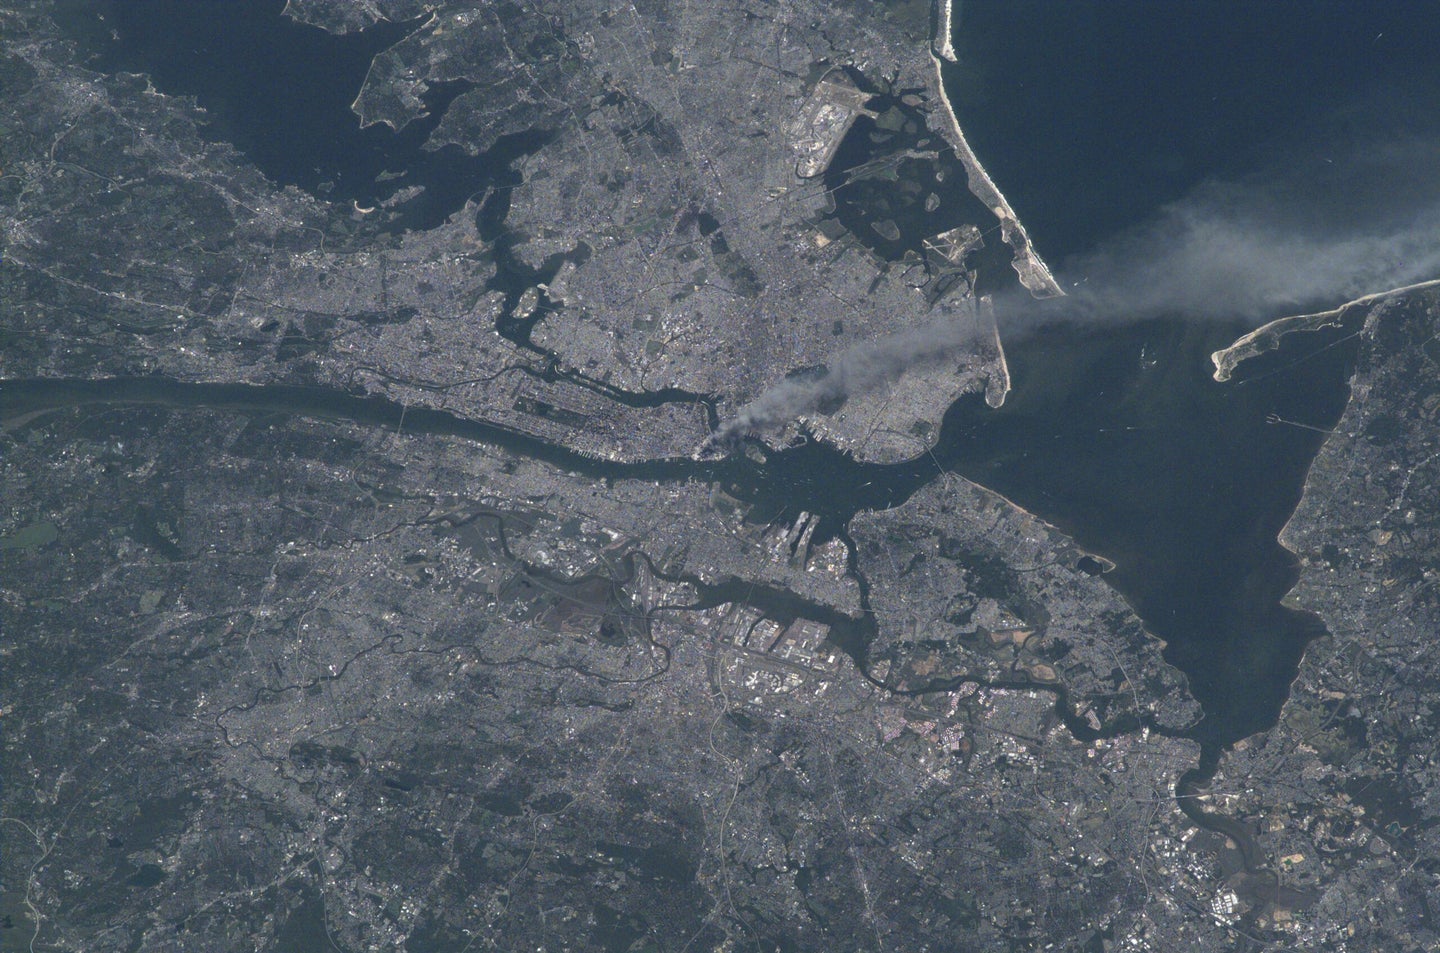 Visible from space, a smoke plume rises from the Manhattan area after two planes crashed into the towers of the World Trade Center. This photo was taken of metropolitan New York City (and other parts of New York as well as New Jersey) the morning of September 11, 2001.